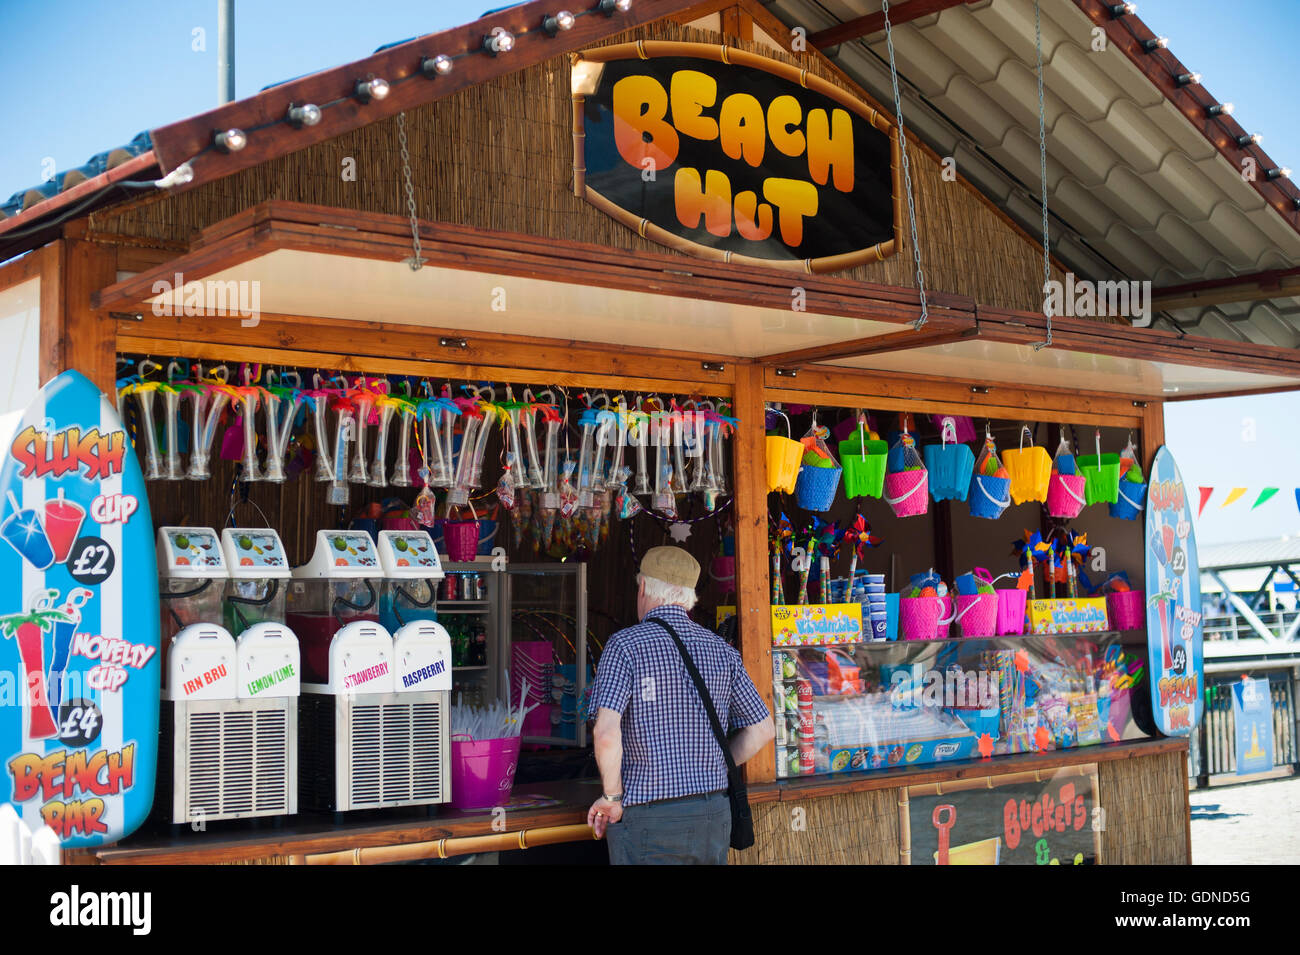 A temporary beach hut stall set up at the Liverpool pier head during summer heatwave 2016 uk Stock Photo